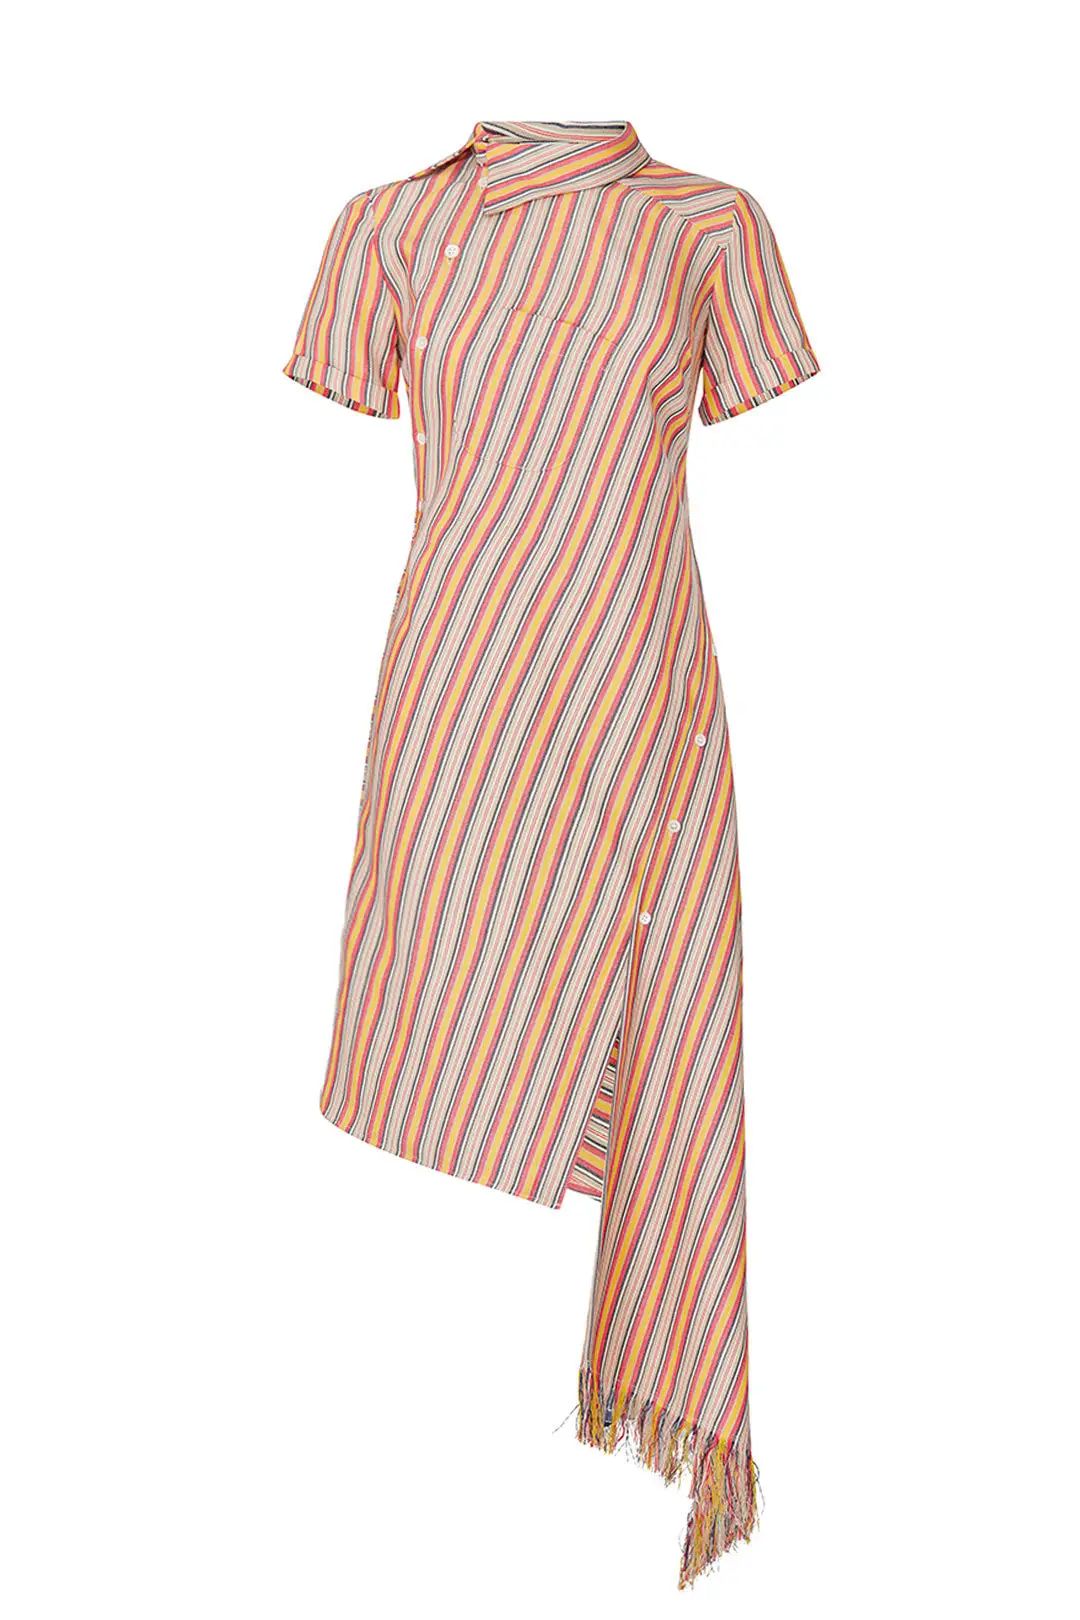 MONSE Striped Deconstructed Dress | Rent The Runway